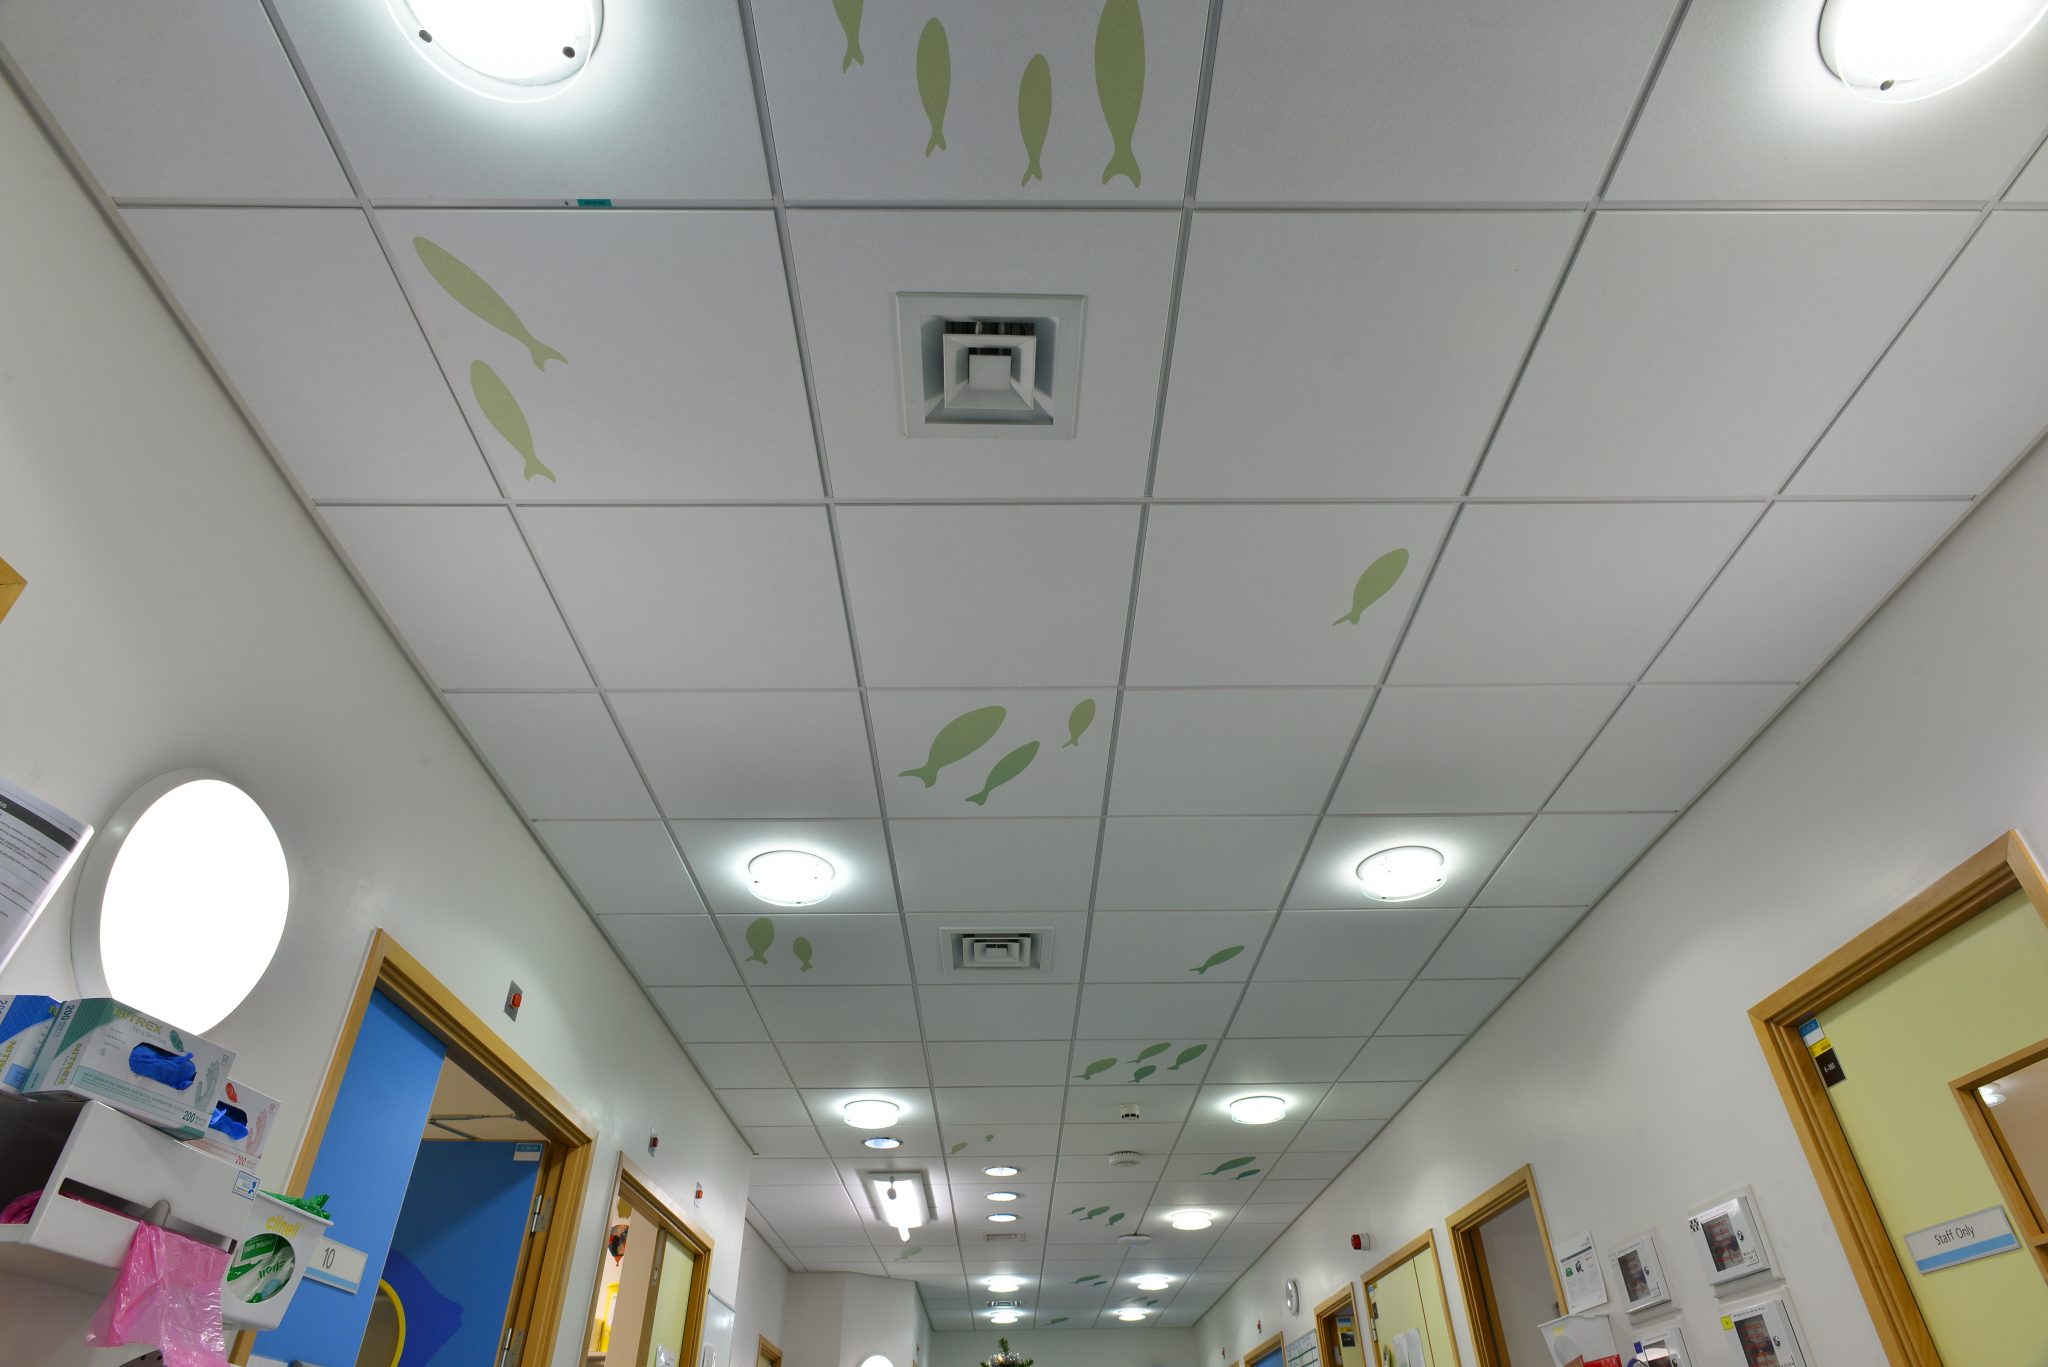 Bristol children’s hospital refurbishment includes Armstrong printed ceilings.